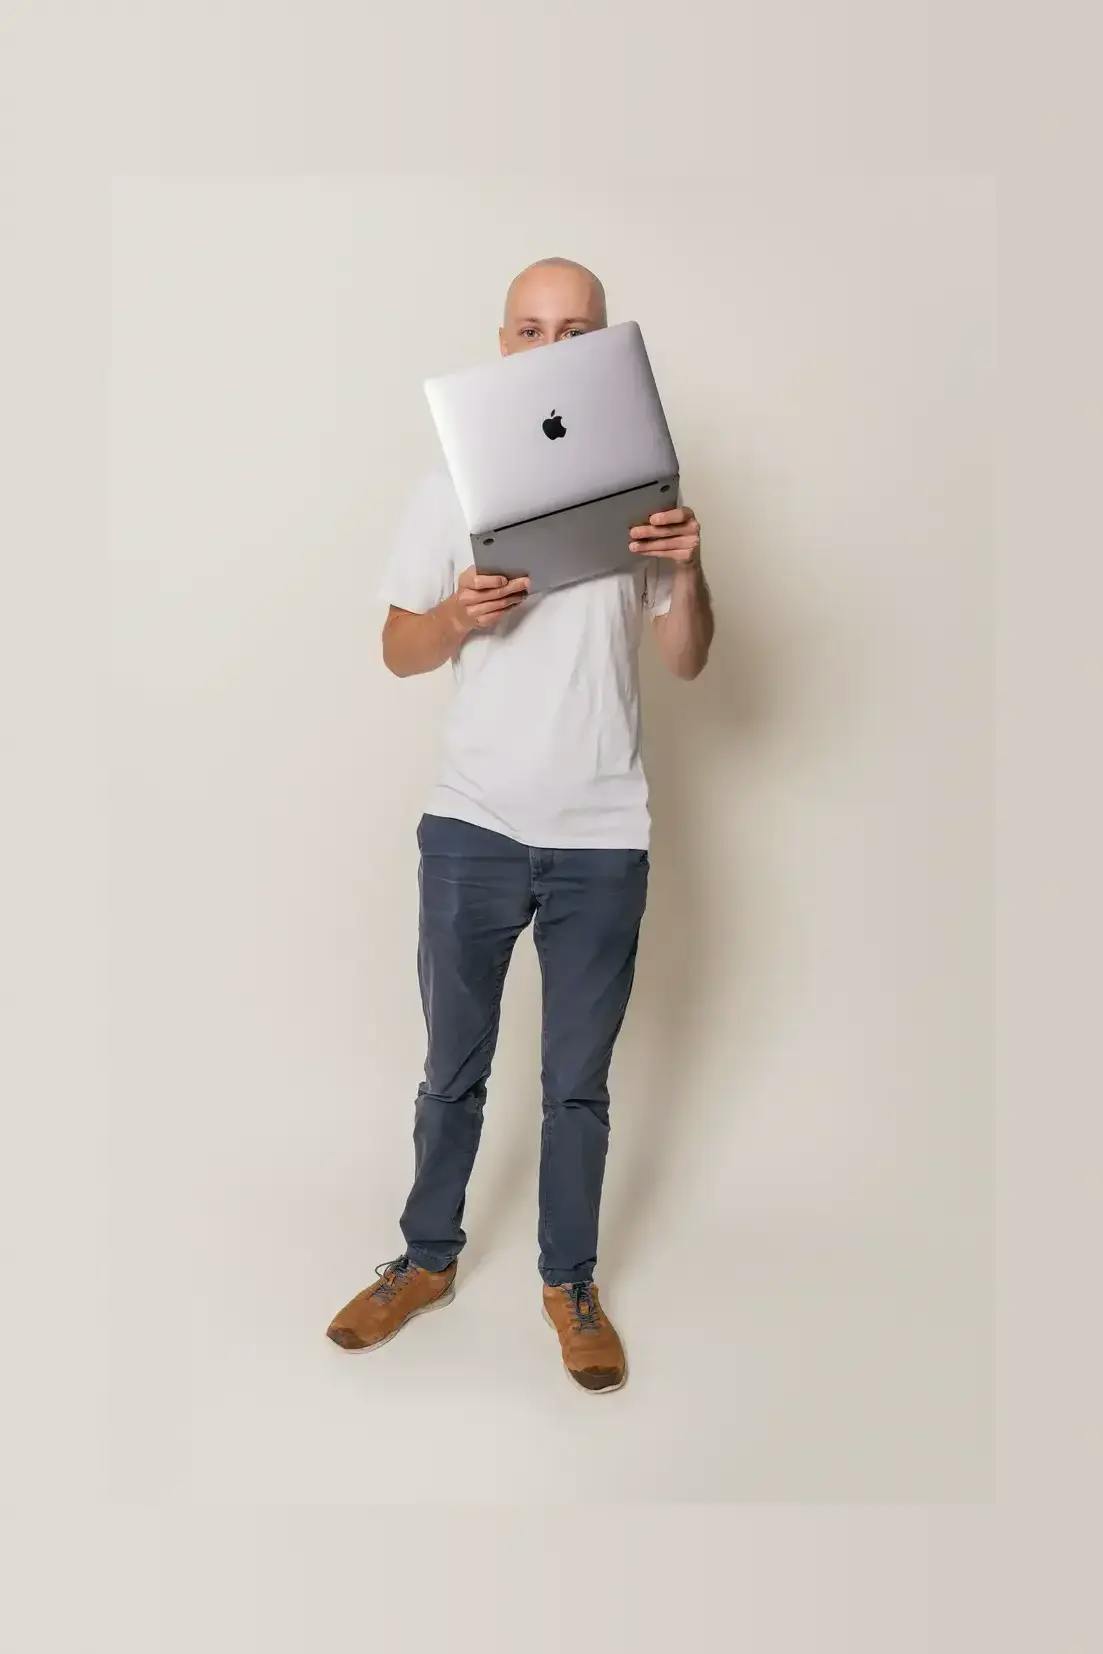 Picture of a men posing with a laptop.